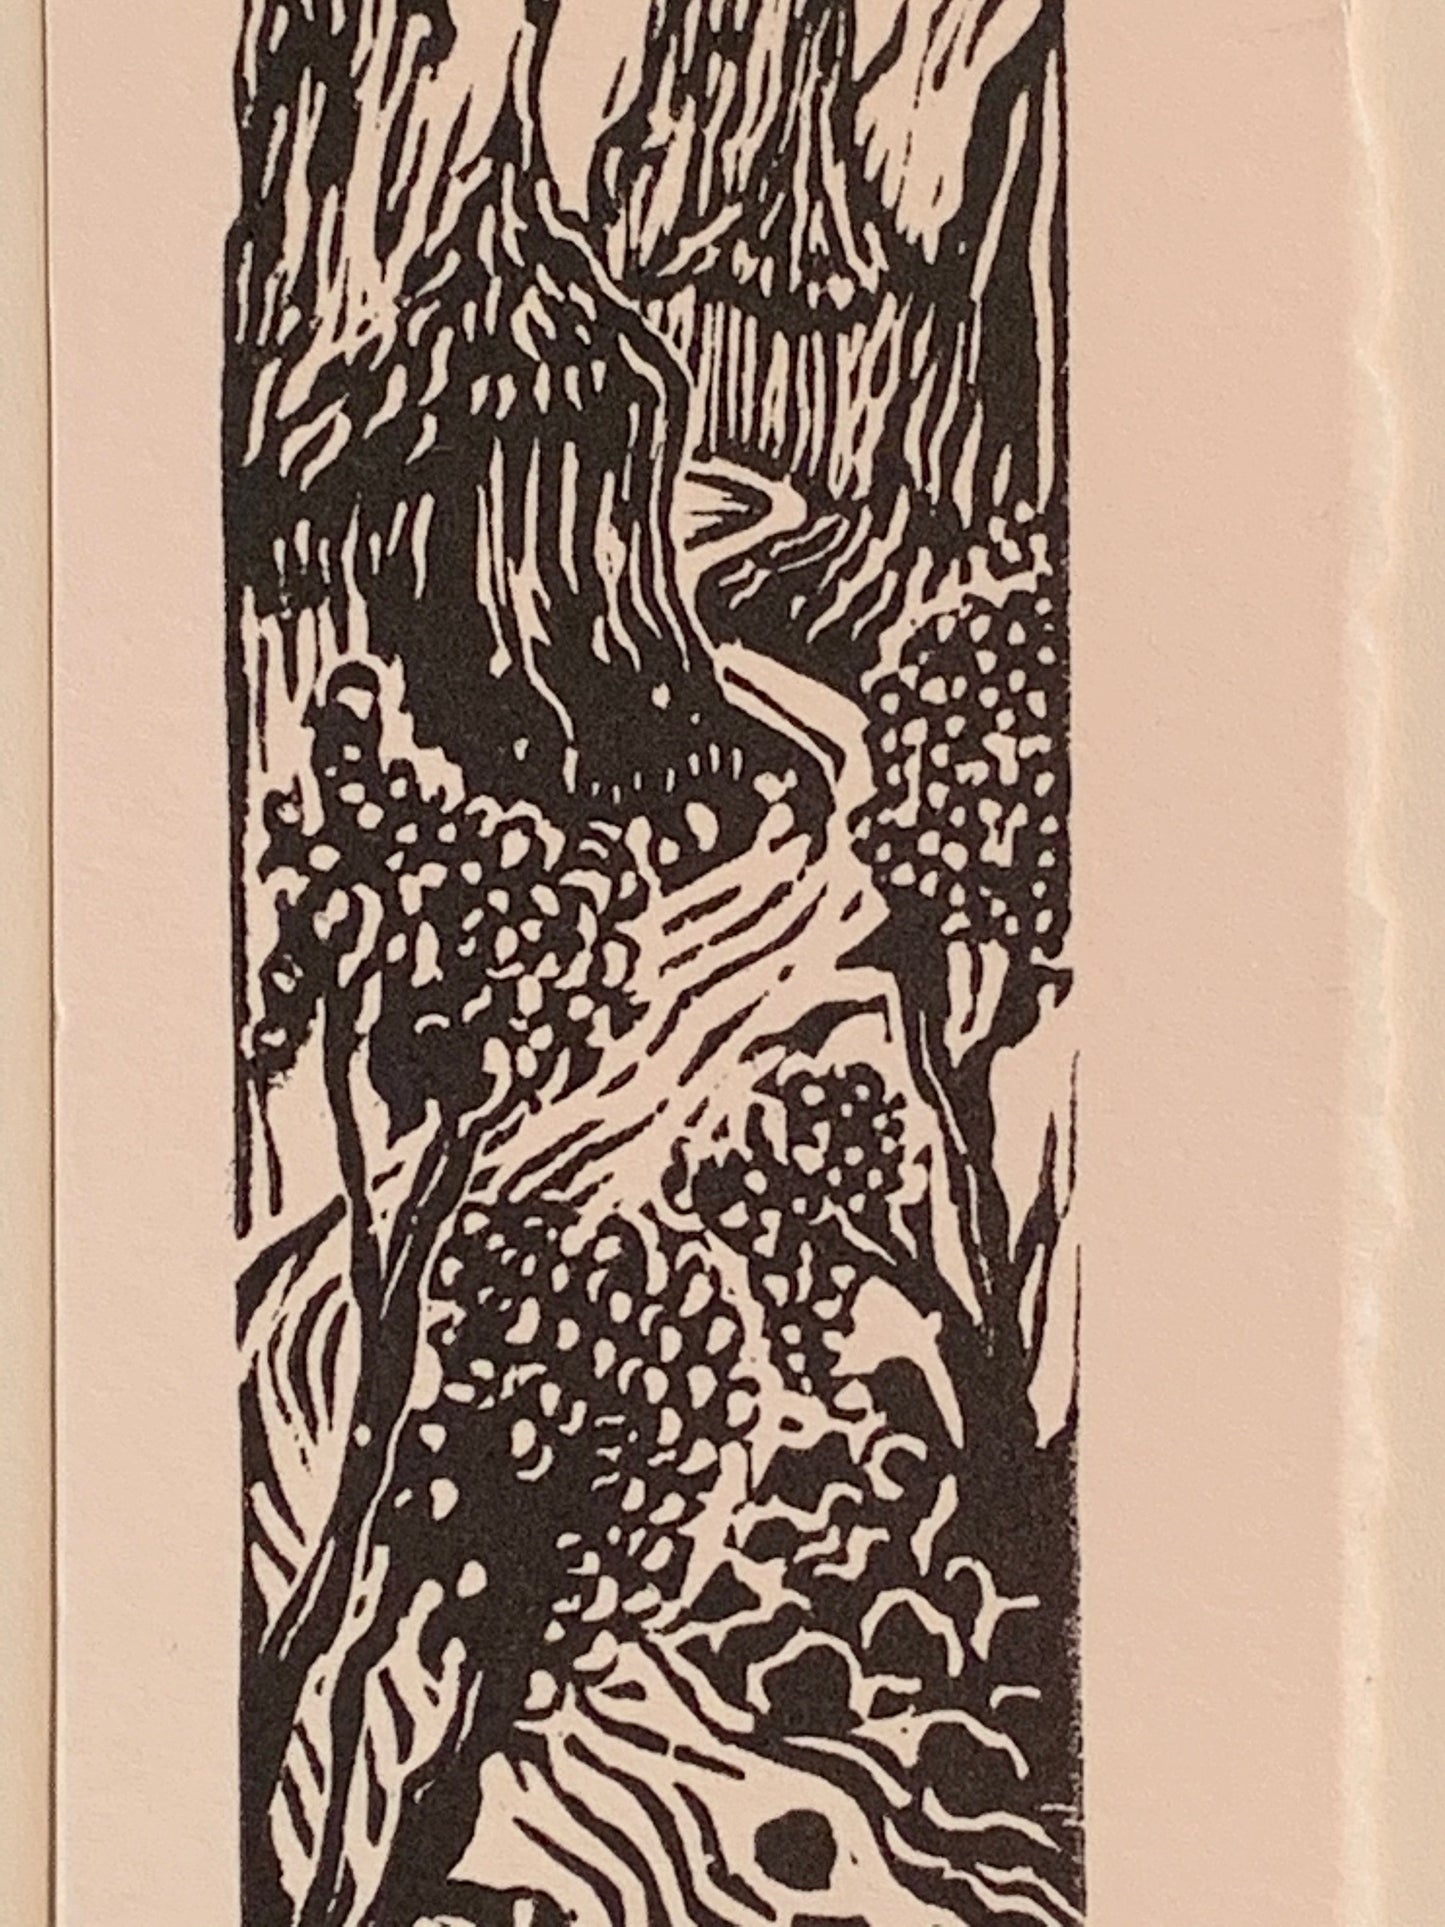 Canyon River Rapids Run original woodcut small print from Water in the Desert